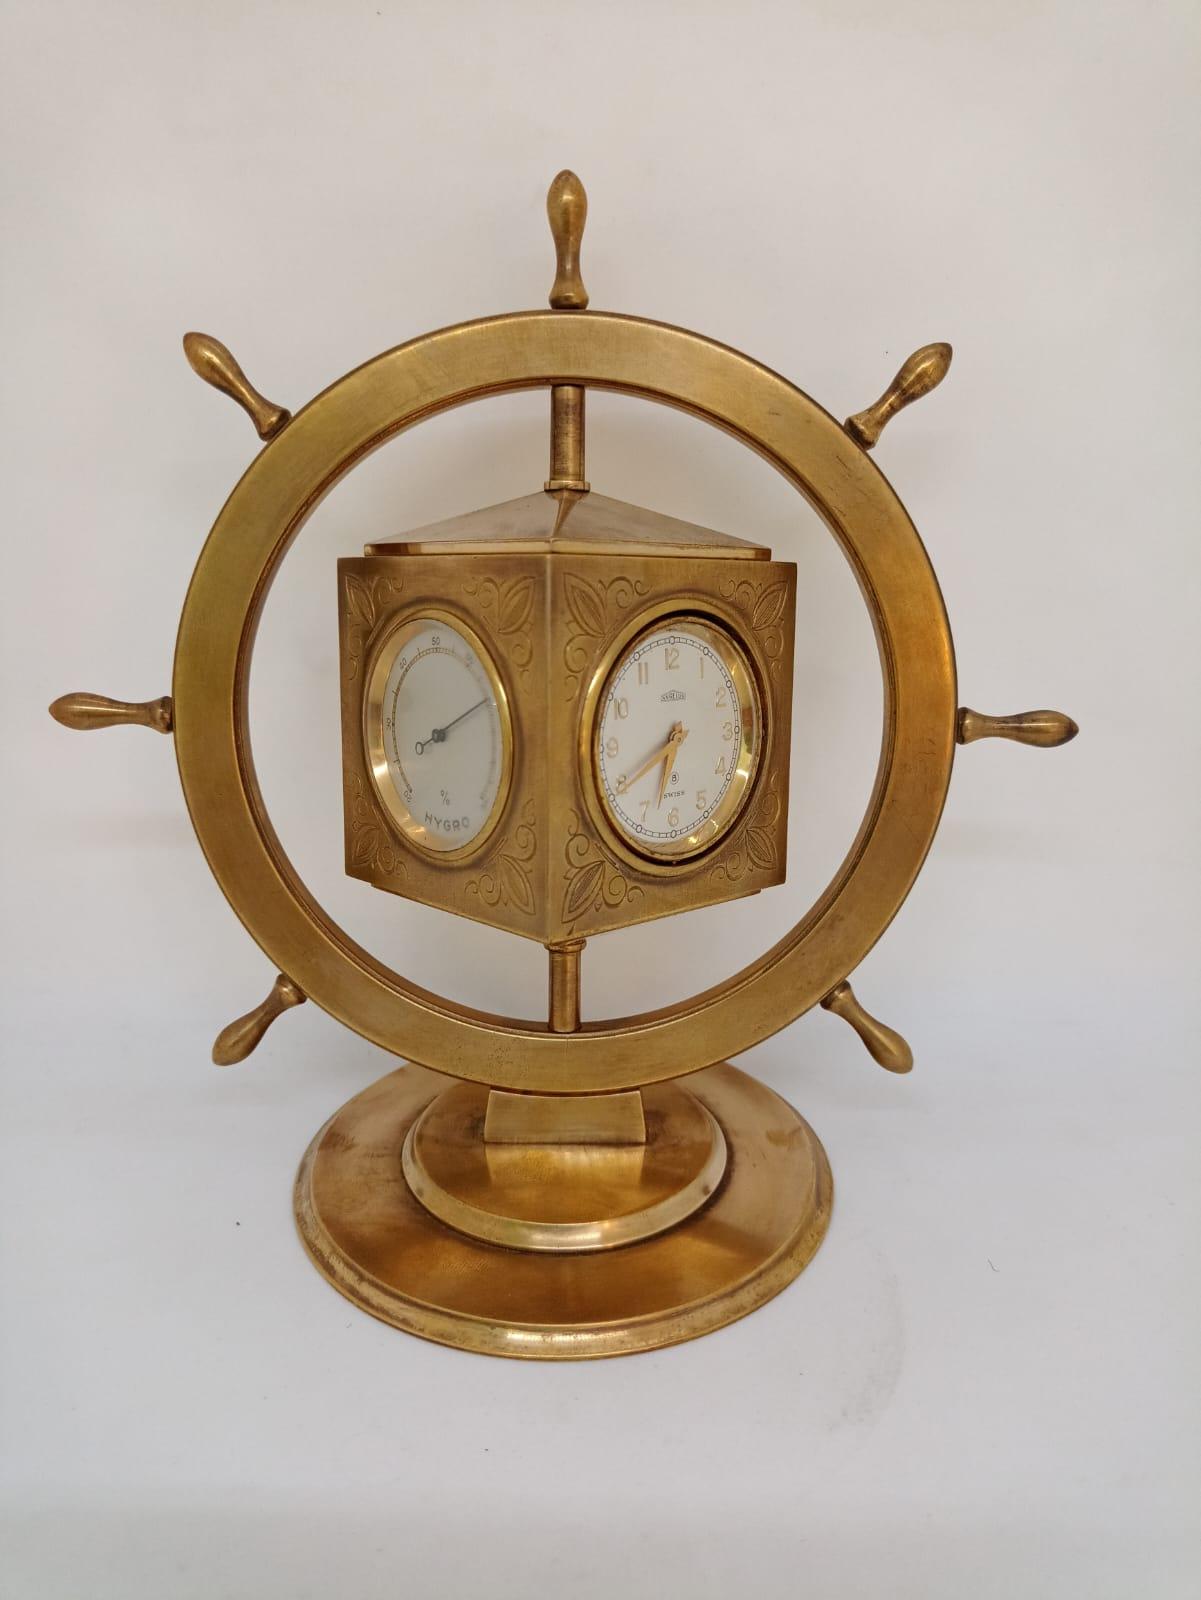 Angelus Weather Station
Table clock with 8 day movement
Very fine and rare weather station
Circa 1960 Origin Switzerland
Motif: ship's wheel
Clock - barometer - hygrometer - thermometer
everything works
Very good condition (natural wear)
hand